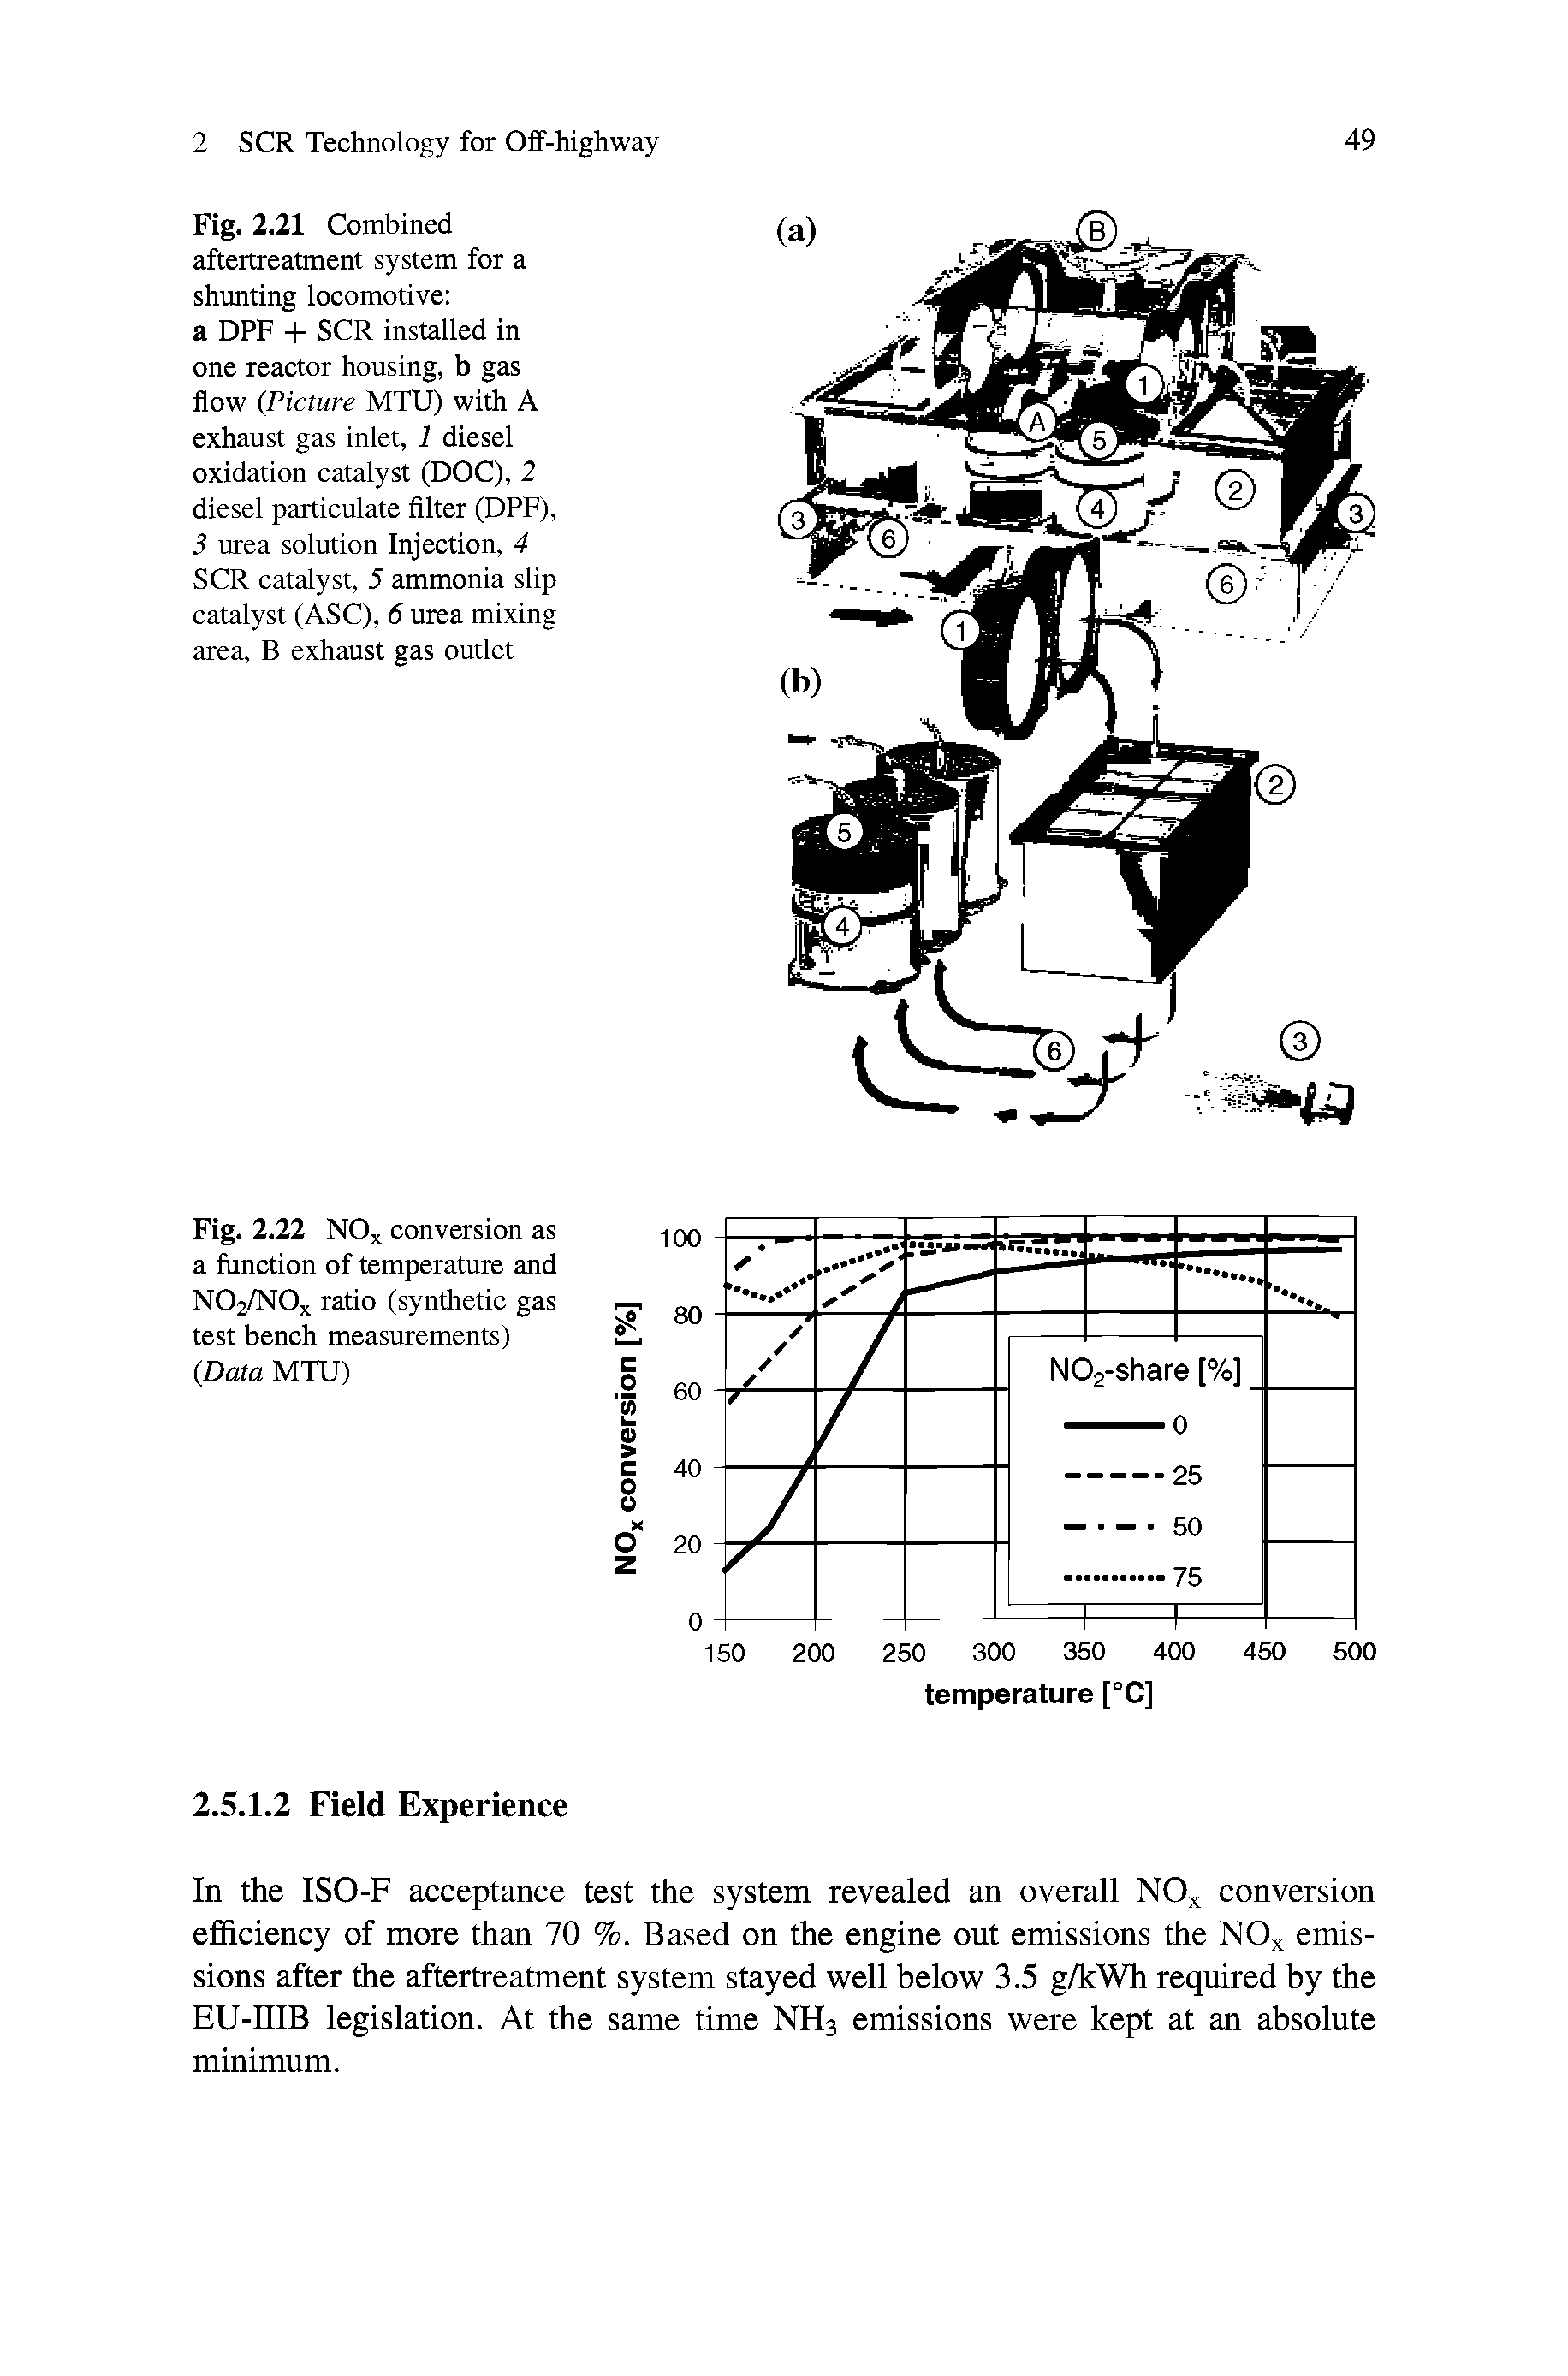 Fig. 2.21 Combined aftertreatment system for a shunting locomotive a DPF -I- SCR installed in one reactor housing, b gas flow (Picture MTU) with A exhaust gas inlet, 1 diesel oxidation catalyst (DOC), 2 diesel particulate filter (DPF), 3 urea solution Injection, 4 SCR catalyst, 5 ammonia slip catalyst (ASC), 6 urea mixing area, B exhaust gas outlet...